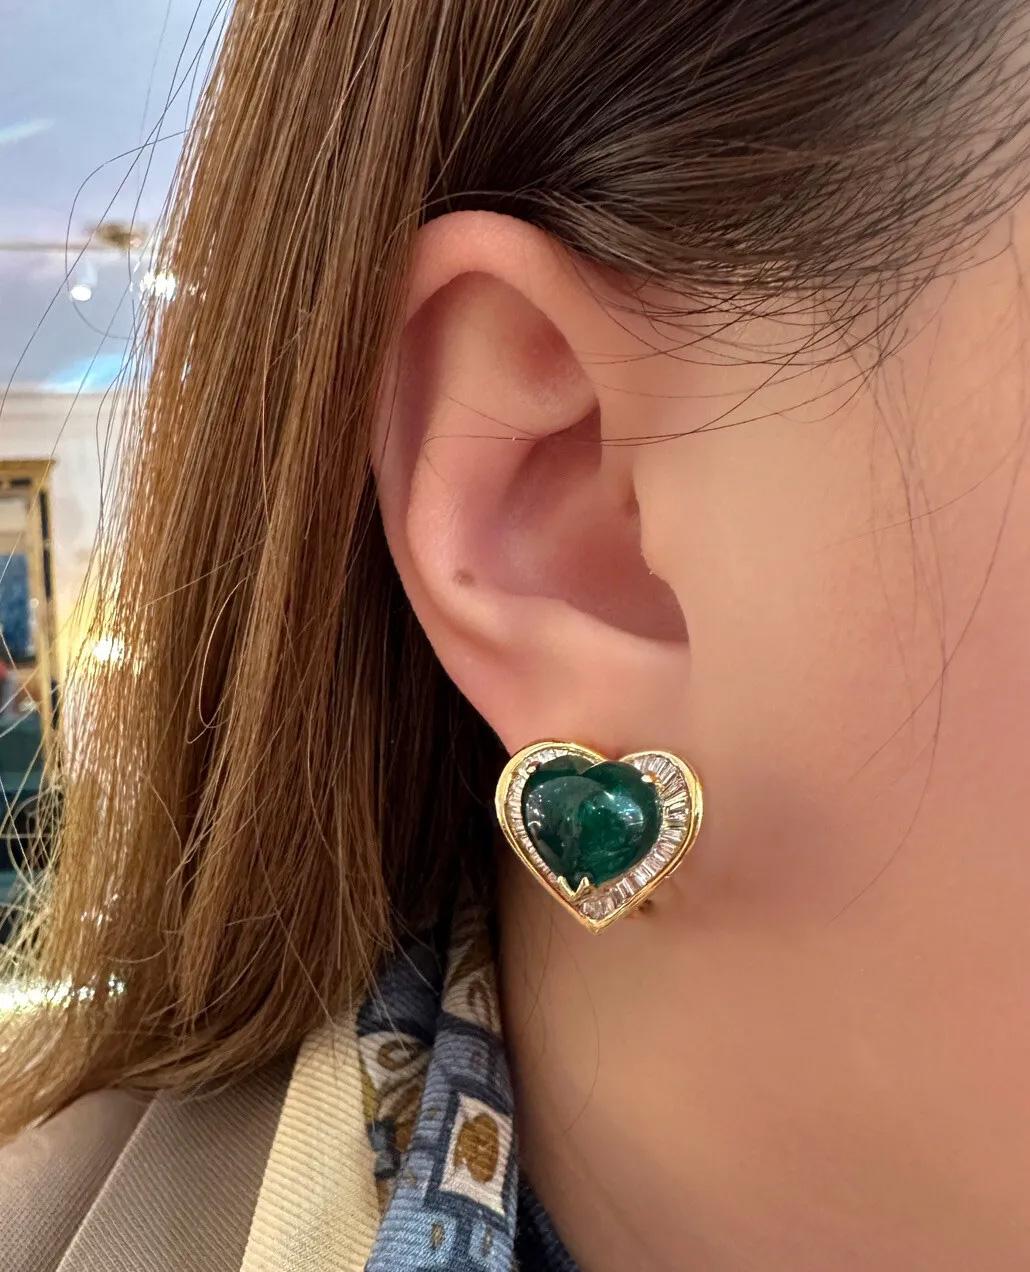 Heart Cabochon Emerald and Baguette Diamond Earrings in 18k Yellow Gold

Emerald and Diamond Earrings features Natural Heart shaped Cabochon  Emeralds surrounded by Baguette Diamonds set in 18k Yellow Gold. Made for pierced ears and secured by an